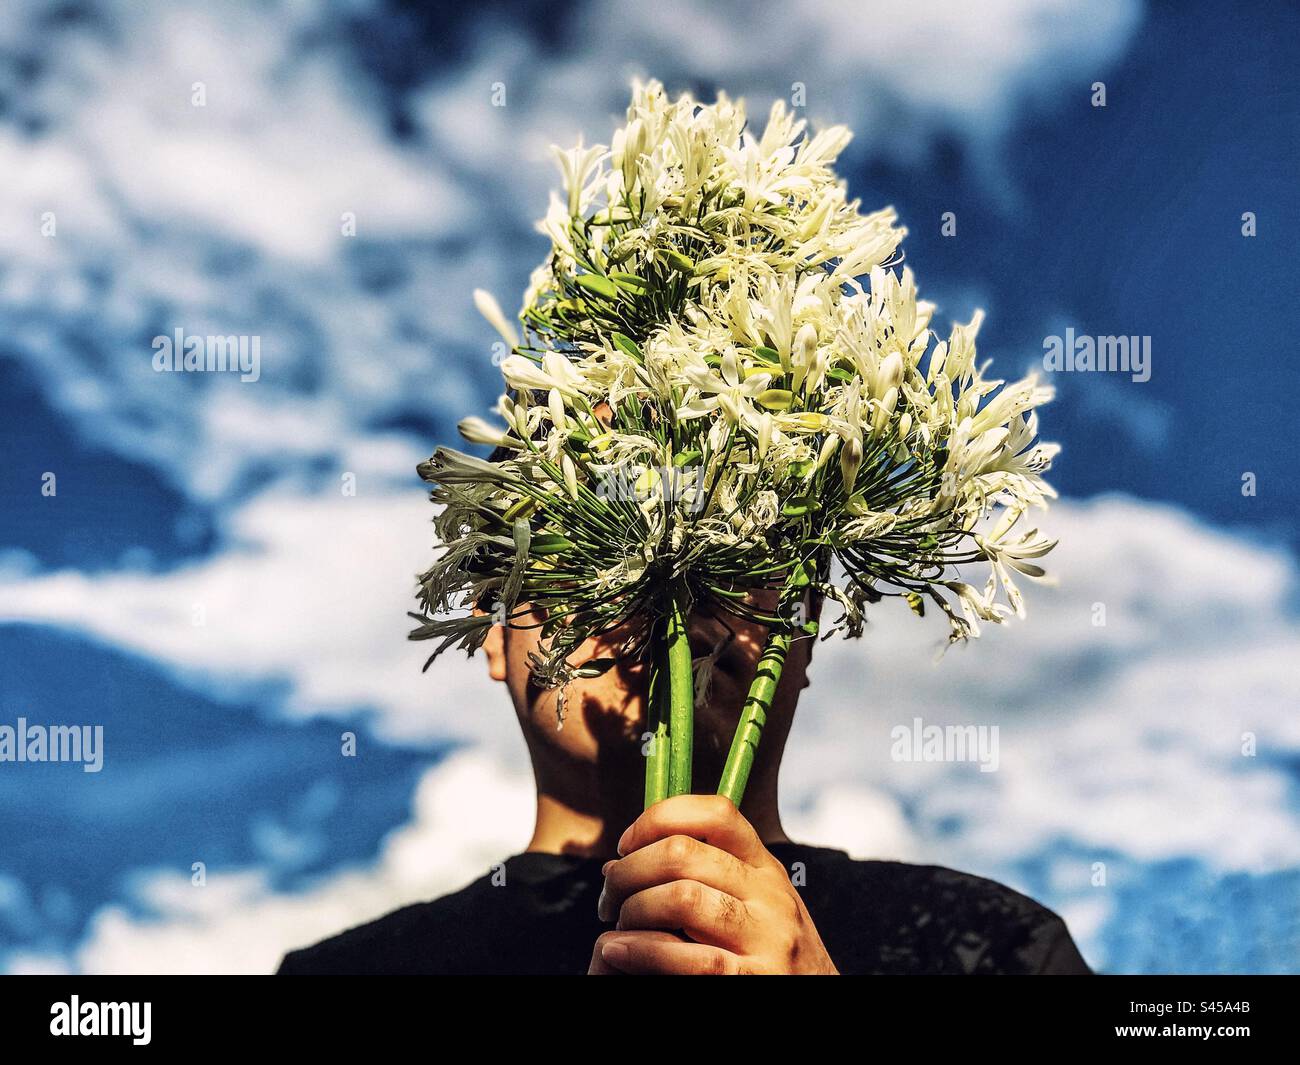 Close-up portrait of young man holding a bouquet of white Agapanthus africanus flowers aka African lily, Lily of the Nile against cloudscape in blue sky. Obscured face. Fashion. Spring/ summer theme. Stock Photo